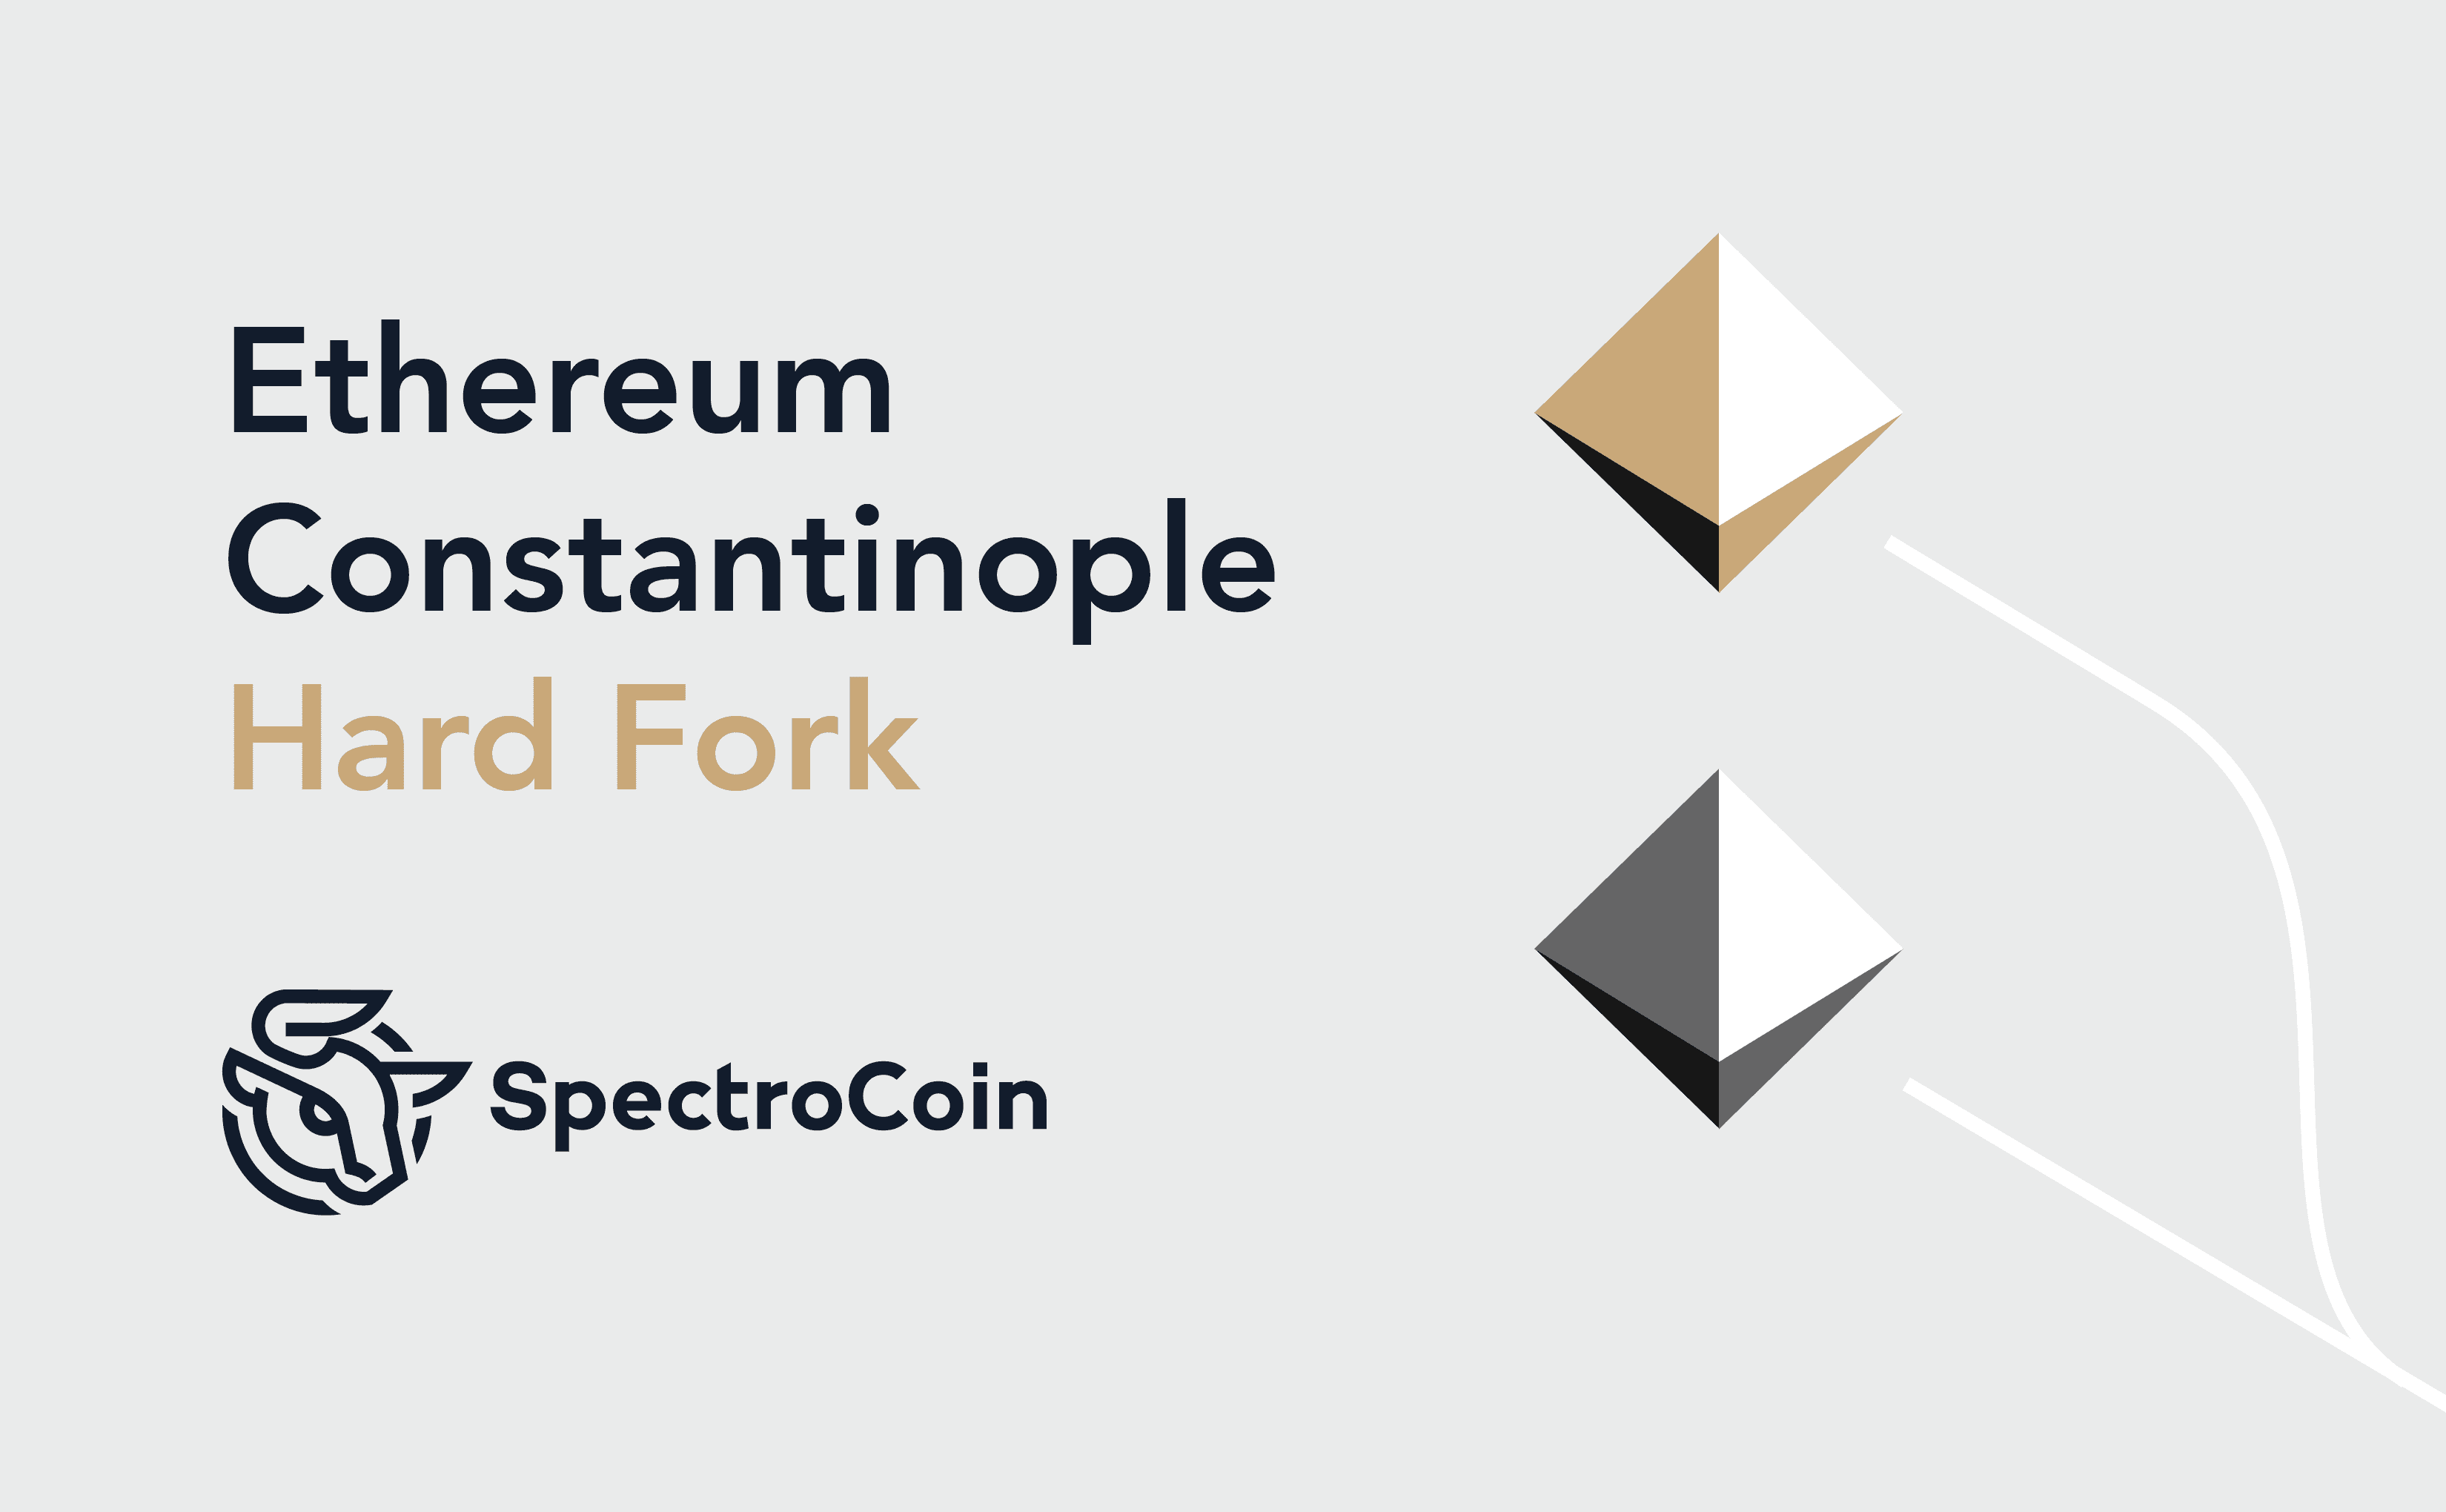 SpectroCoin is Ready to Support ETH Constantinople Hard Fork